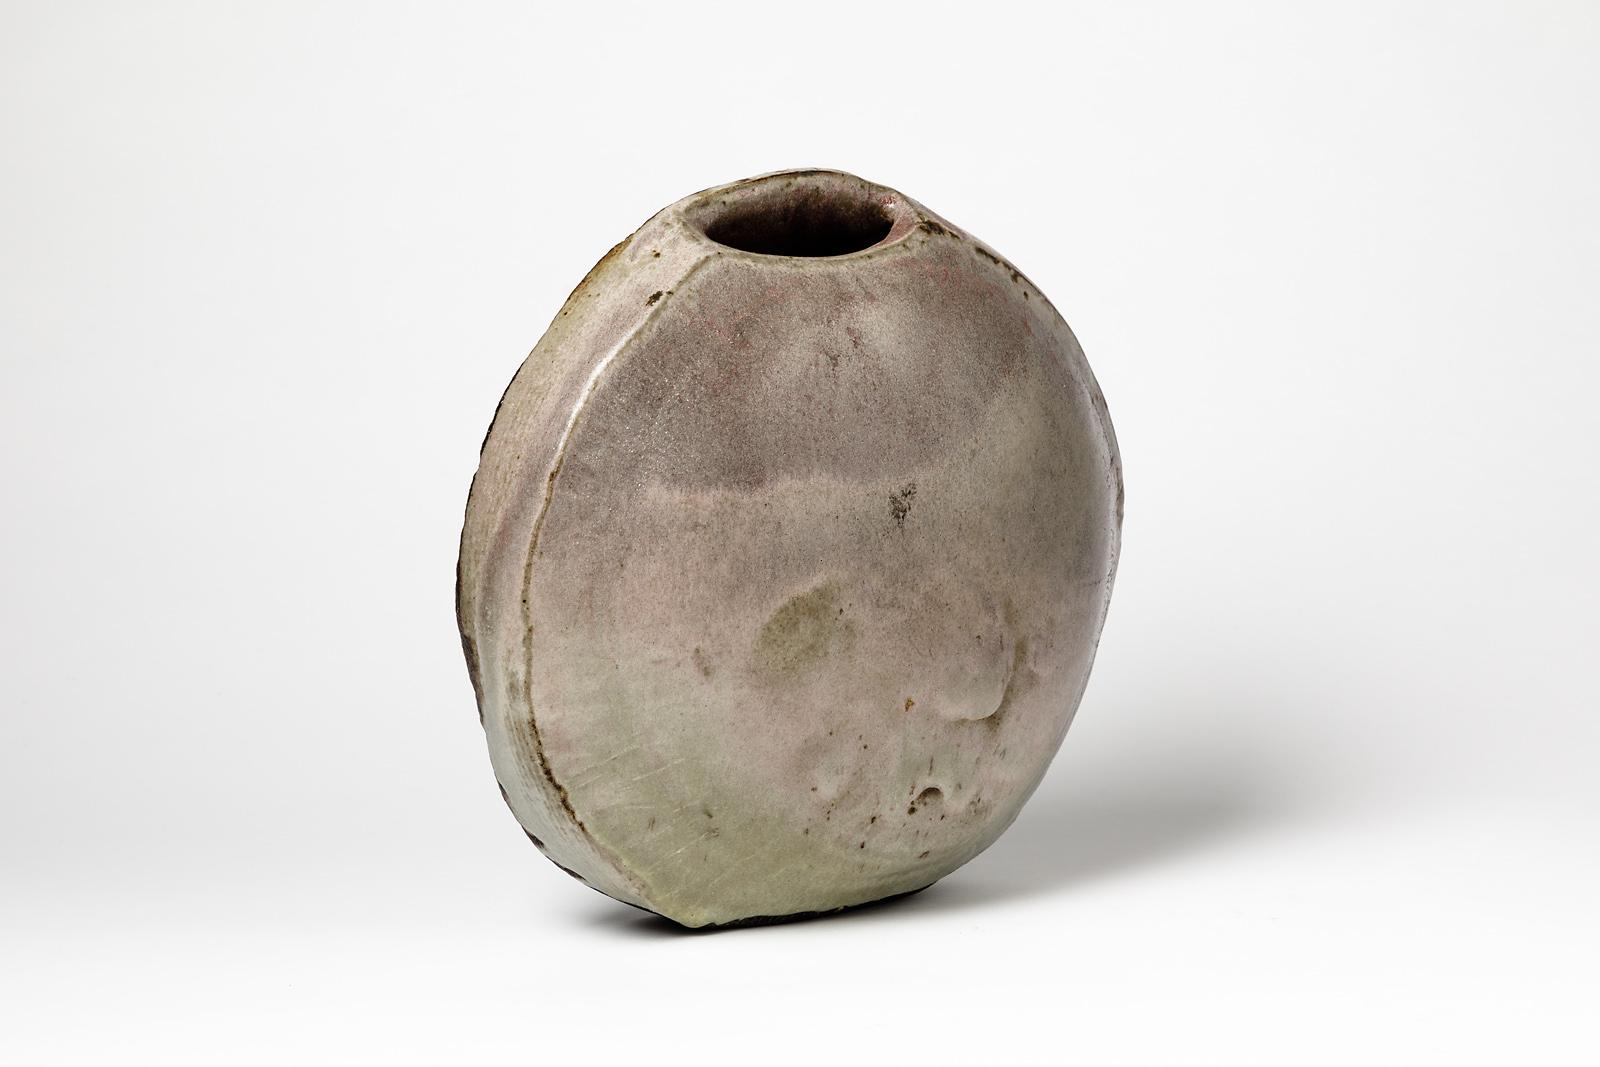 Bernard Dejonghe

Original and decorative stoneware ceramic vase by french artist

Bernard Dejonghe is reprented in many art museums around the world

Elegant light purple and grey stoneware ceramic colors

Signed and dated behind the